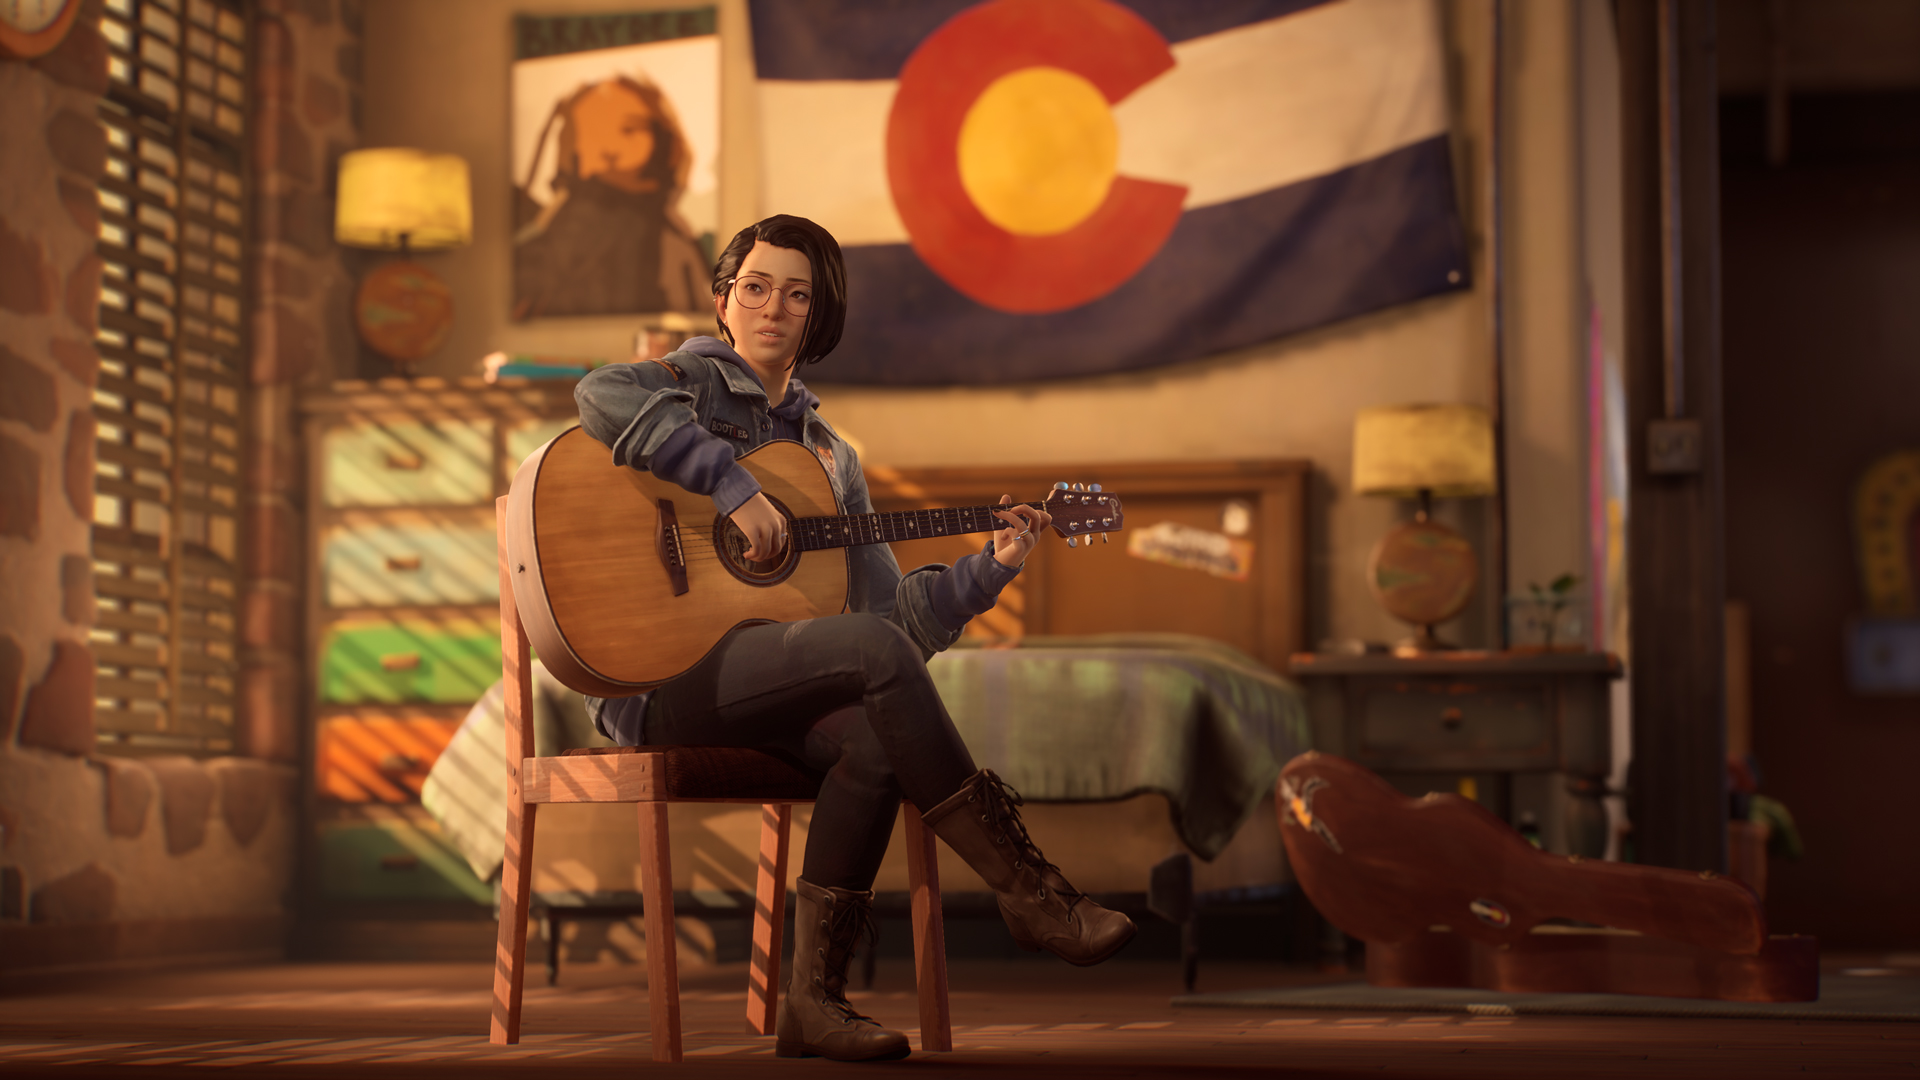 Deck Nine's next project has fans hoping for a new Life is Strange game